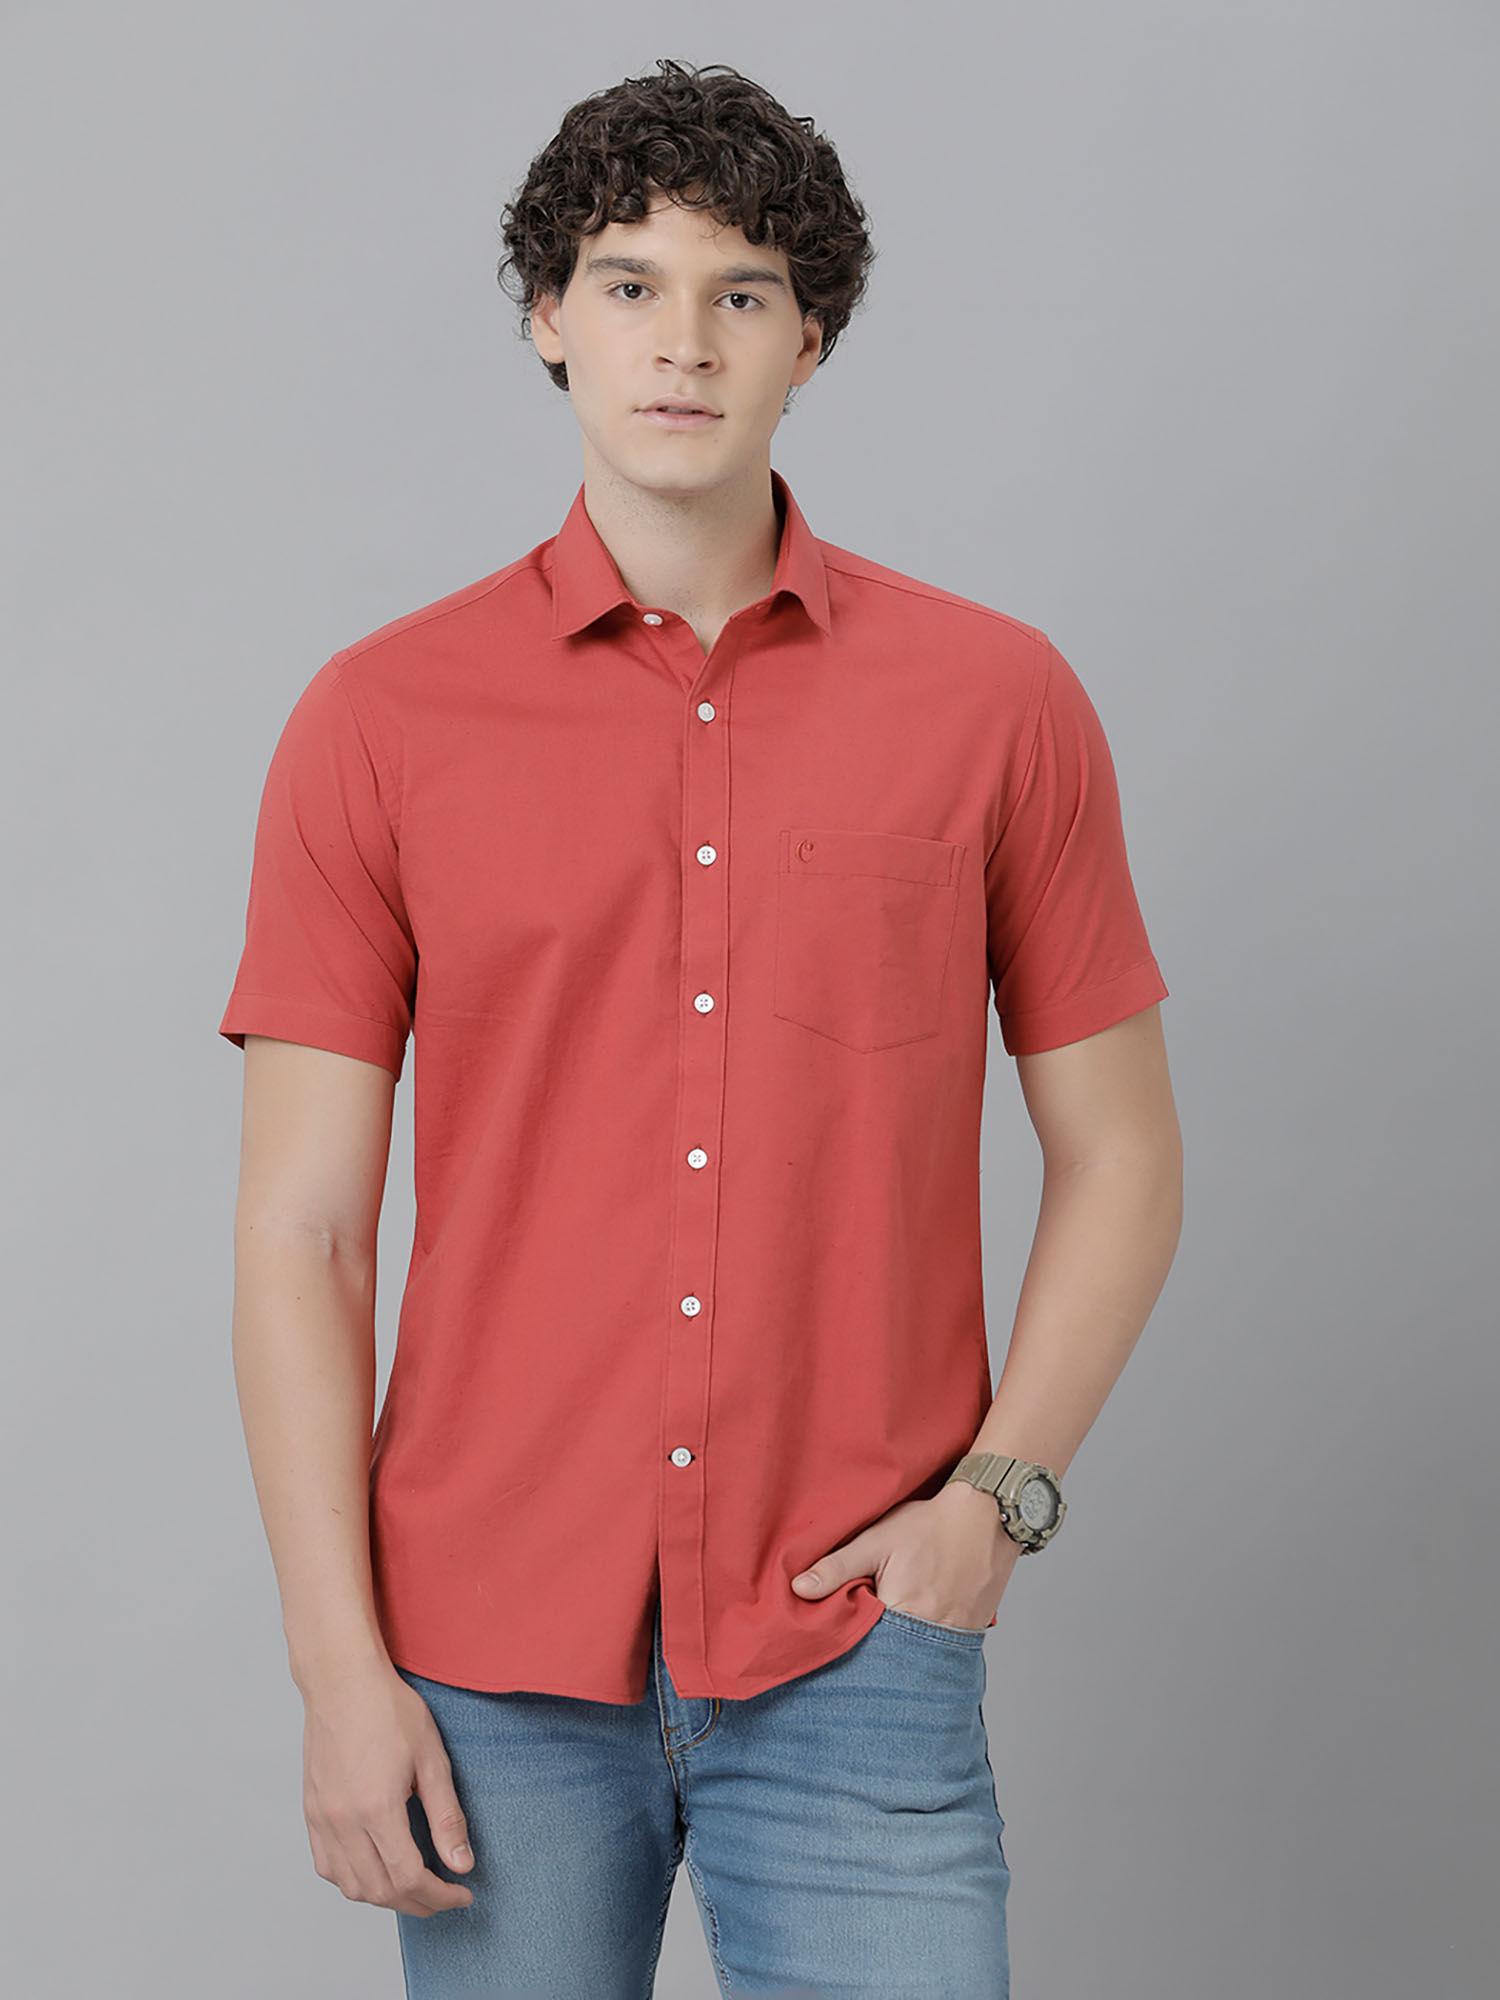 men's-cotton-linen-red-solid-slim-fit-half-sleeve-casual-shirt